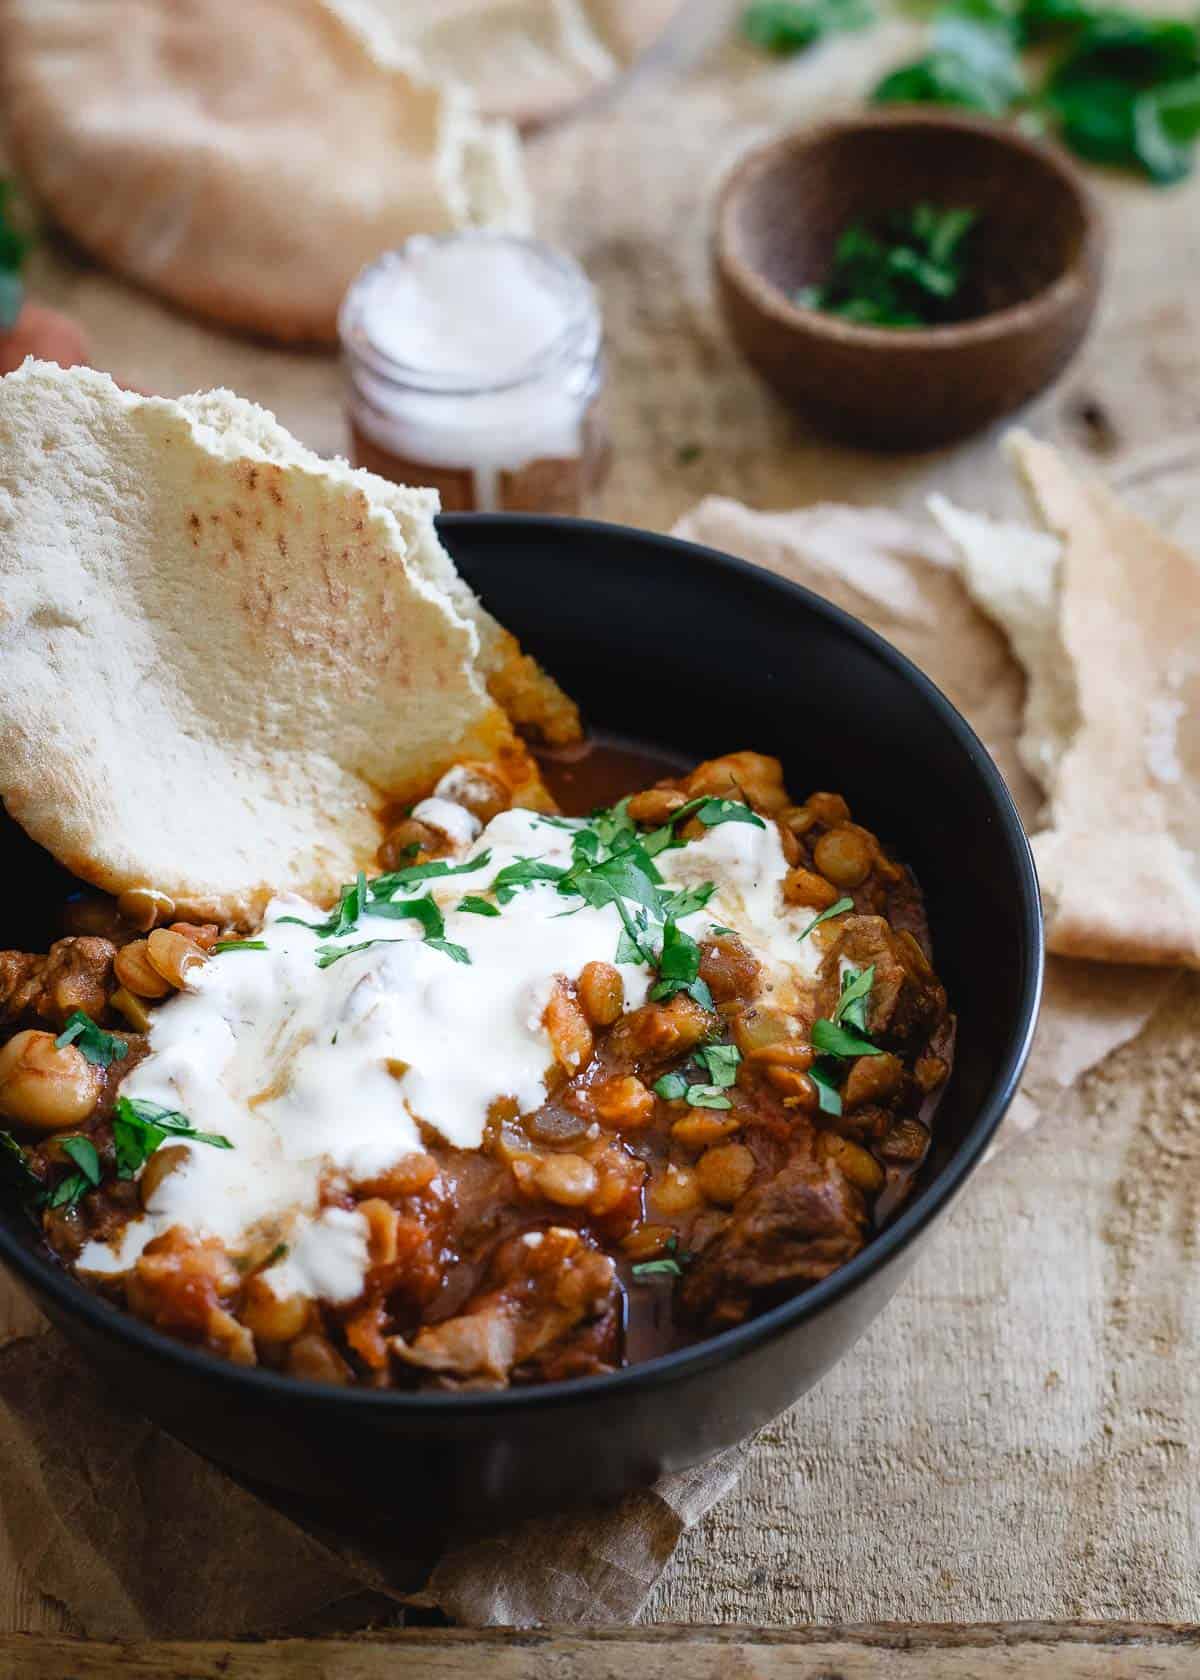 Serve this Moroccan lamb lentil stew with lots of fresh cilantro and a dollop of yogurt to complement the warming pungent spices.